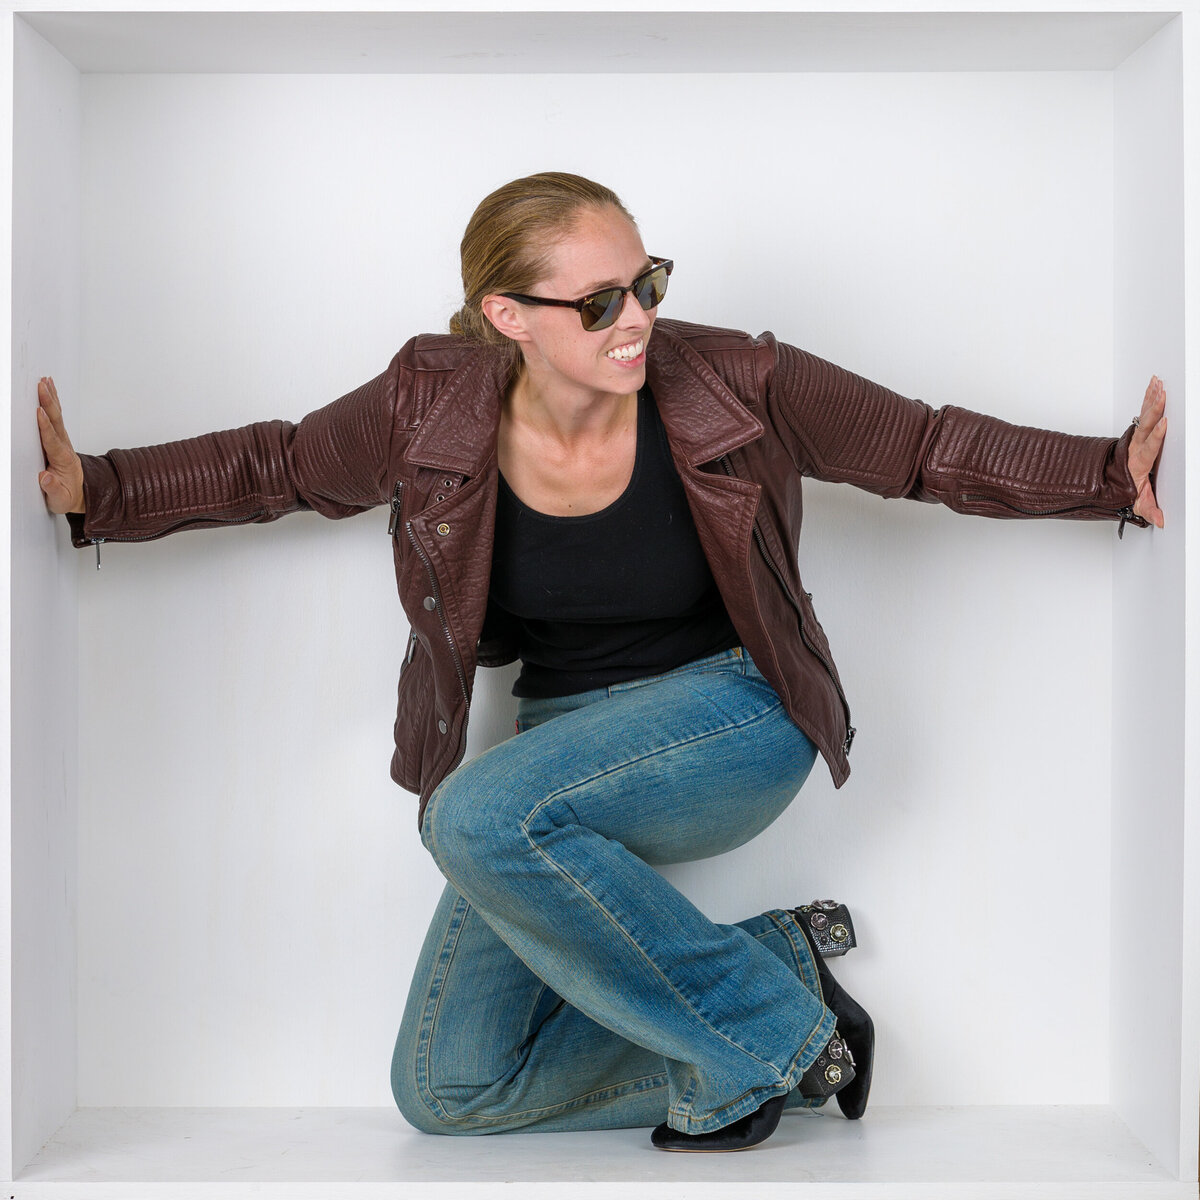 Headshot and branding photographer Jen from Fox & Brazen in  a white box wearing a leather jacket